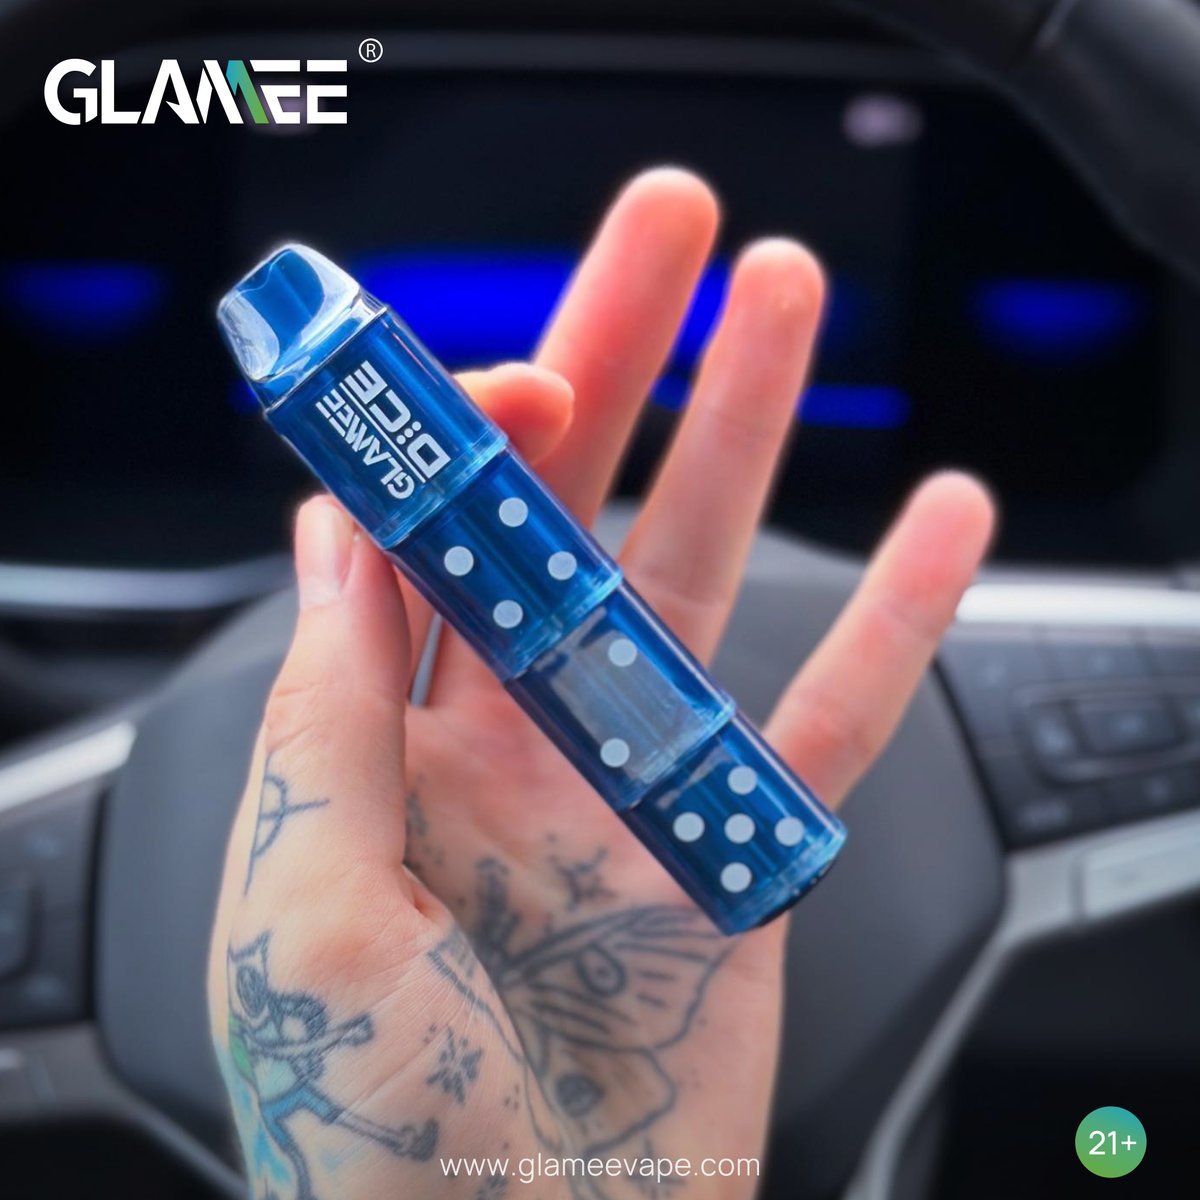 Are you a fan of the Blueberry flavor?
You'll definitely love #GlameeDice once you tried!
.
glameevape.com
#Glamee #Glameevape  #vape #vapefam #vapecommunity #disposablevape #vapelyfe #vapedaily  #vapedisposable #vapelovers #vapelife #vaper #vapepod #vapelove #vapereview